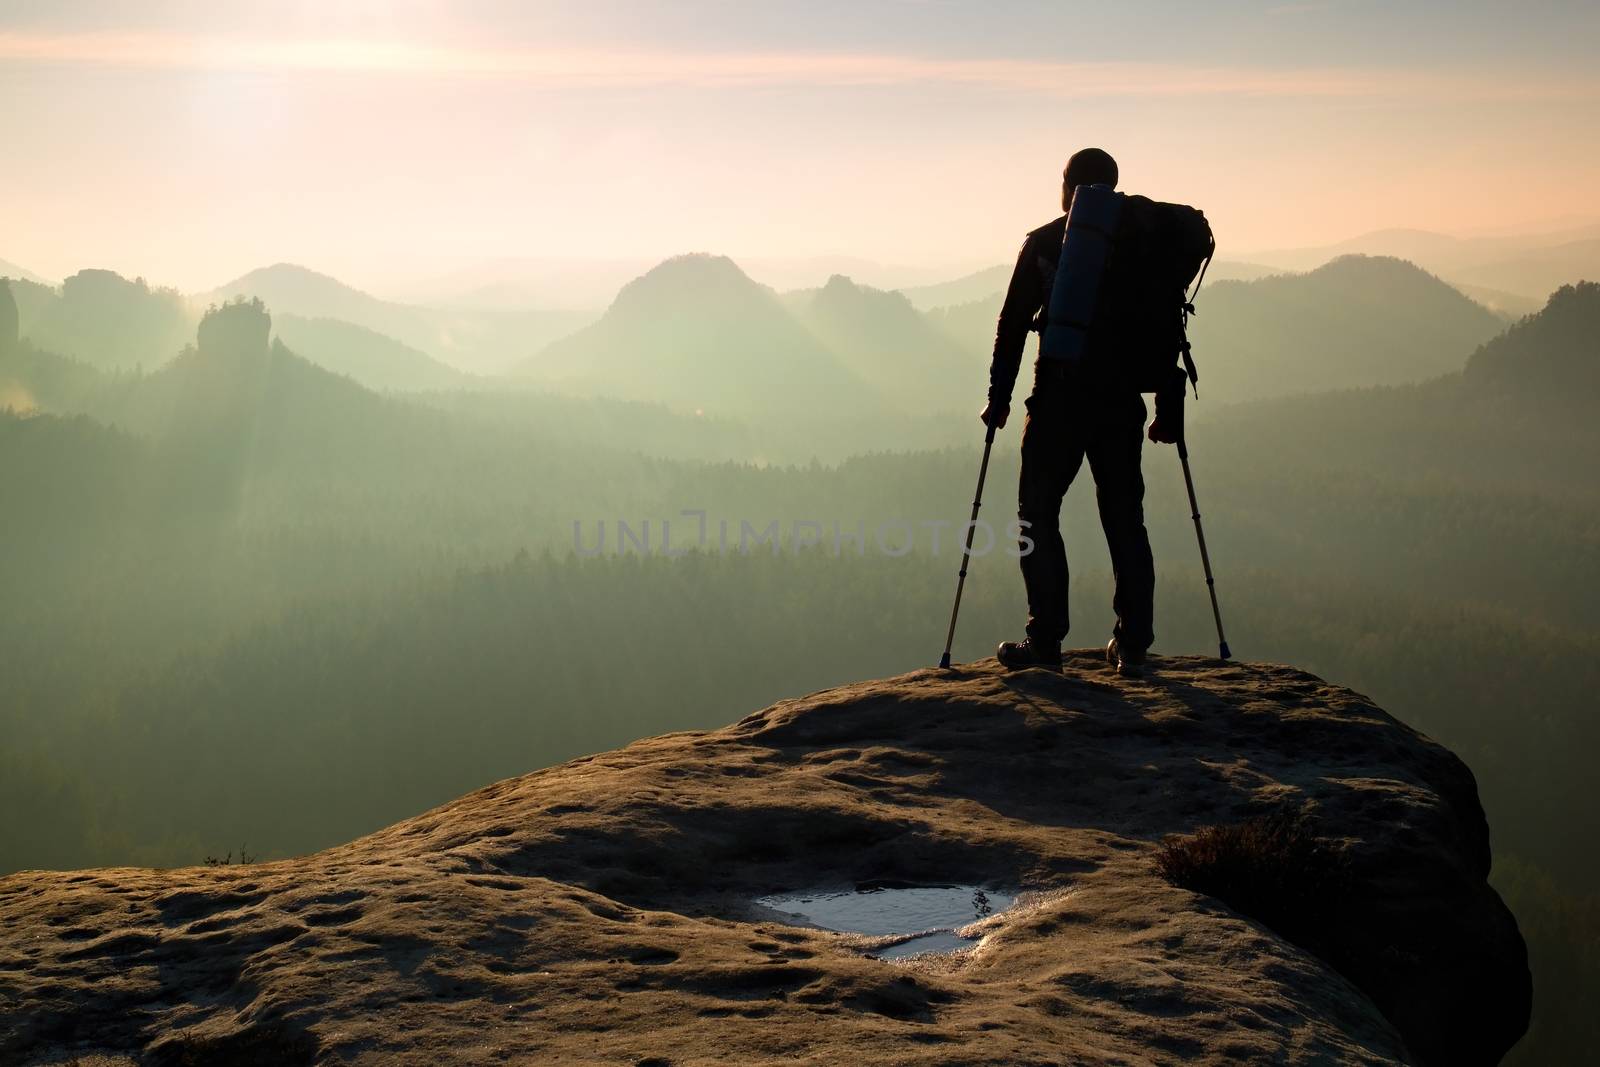 Tourist with leg in immobilizer. Hiker silhouette with medicine crutch on mountain peak. Deep misty valley bellow silhouette of man with hand in air. Spring daybreak